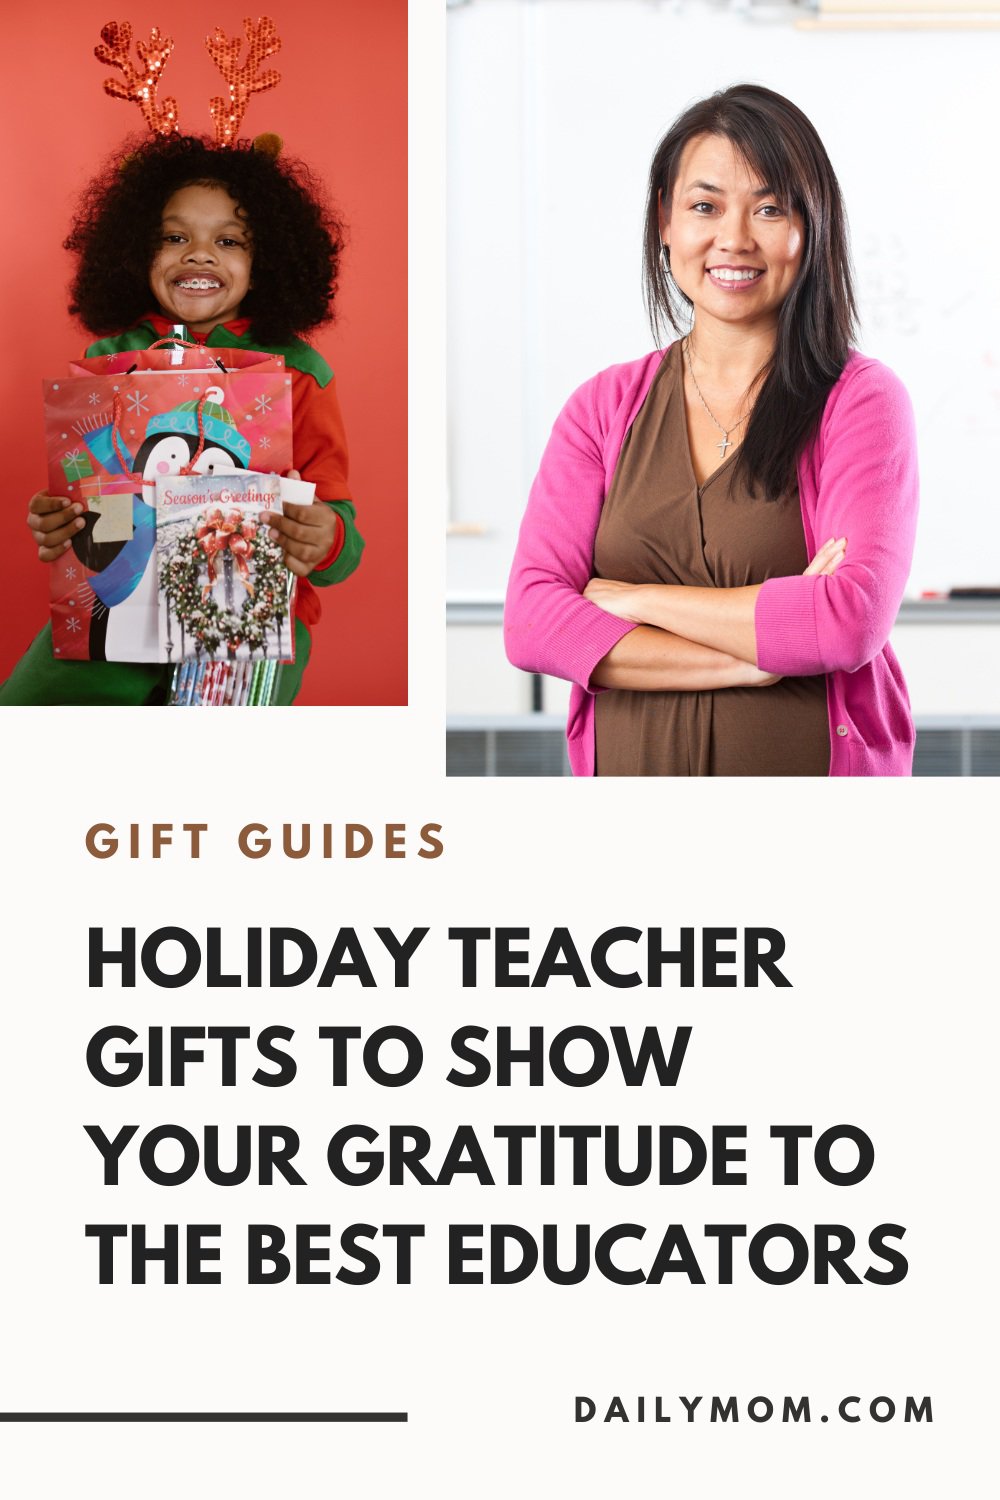 15+ Holiday Teacher Gifts To Show Your Gratitude To The Best Educators 49 Daily Mom, Magazine For Families